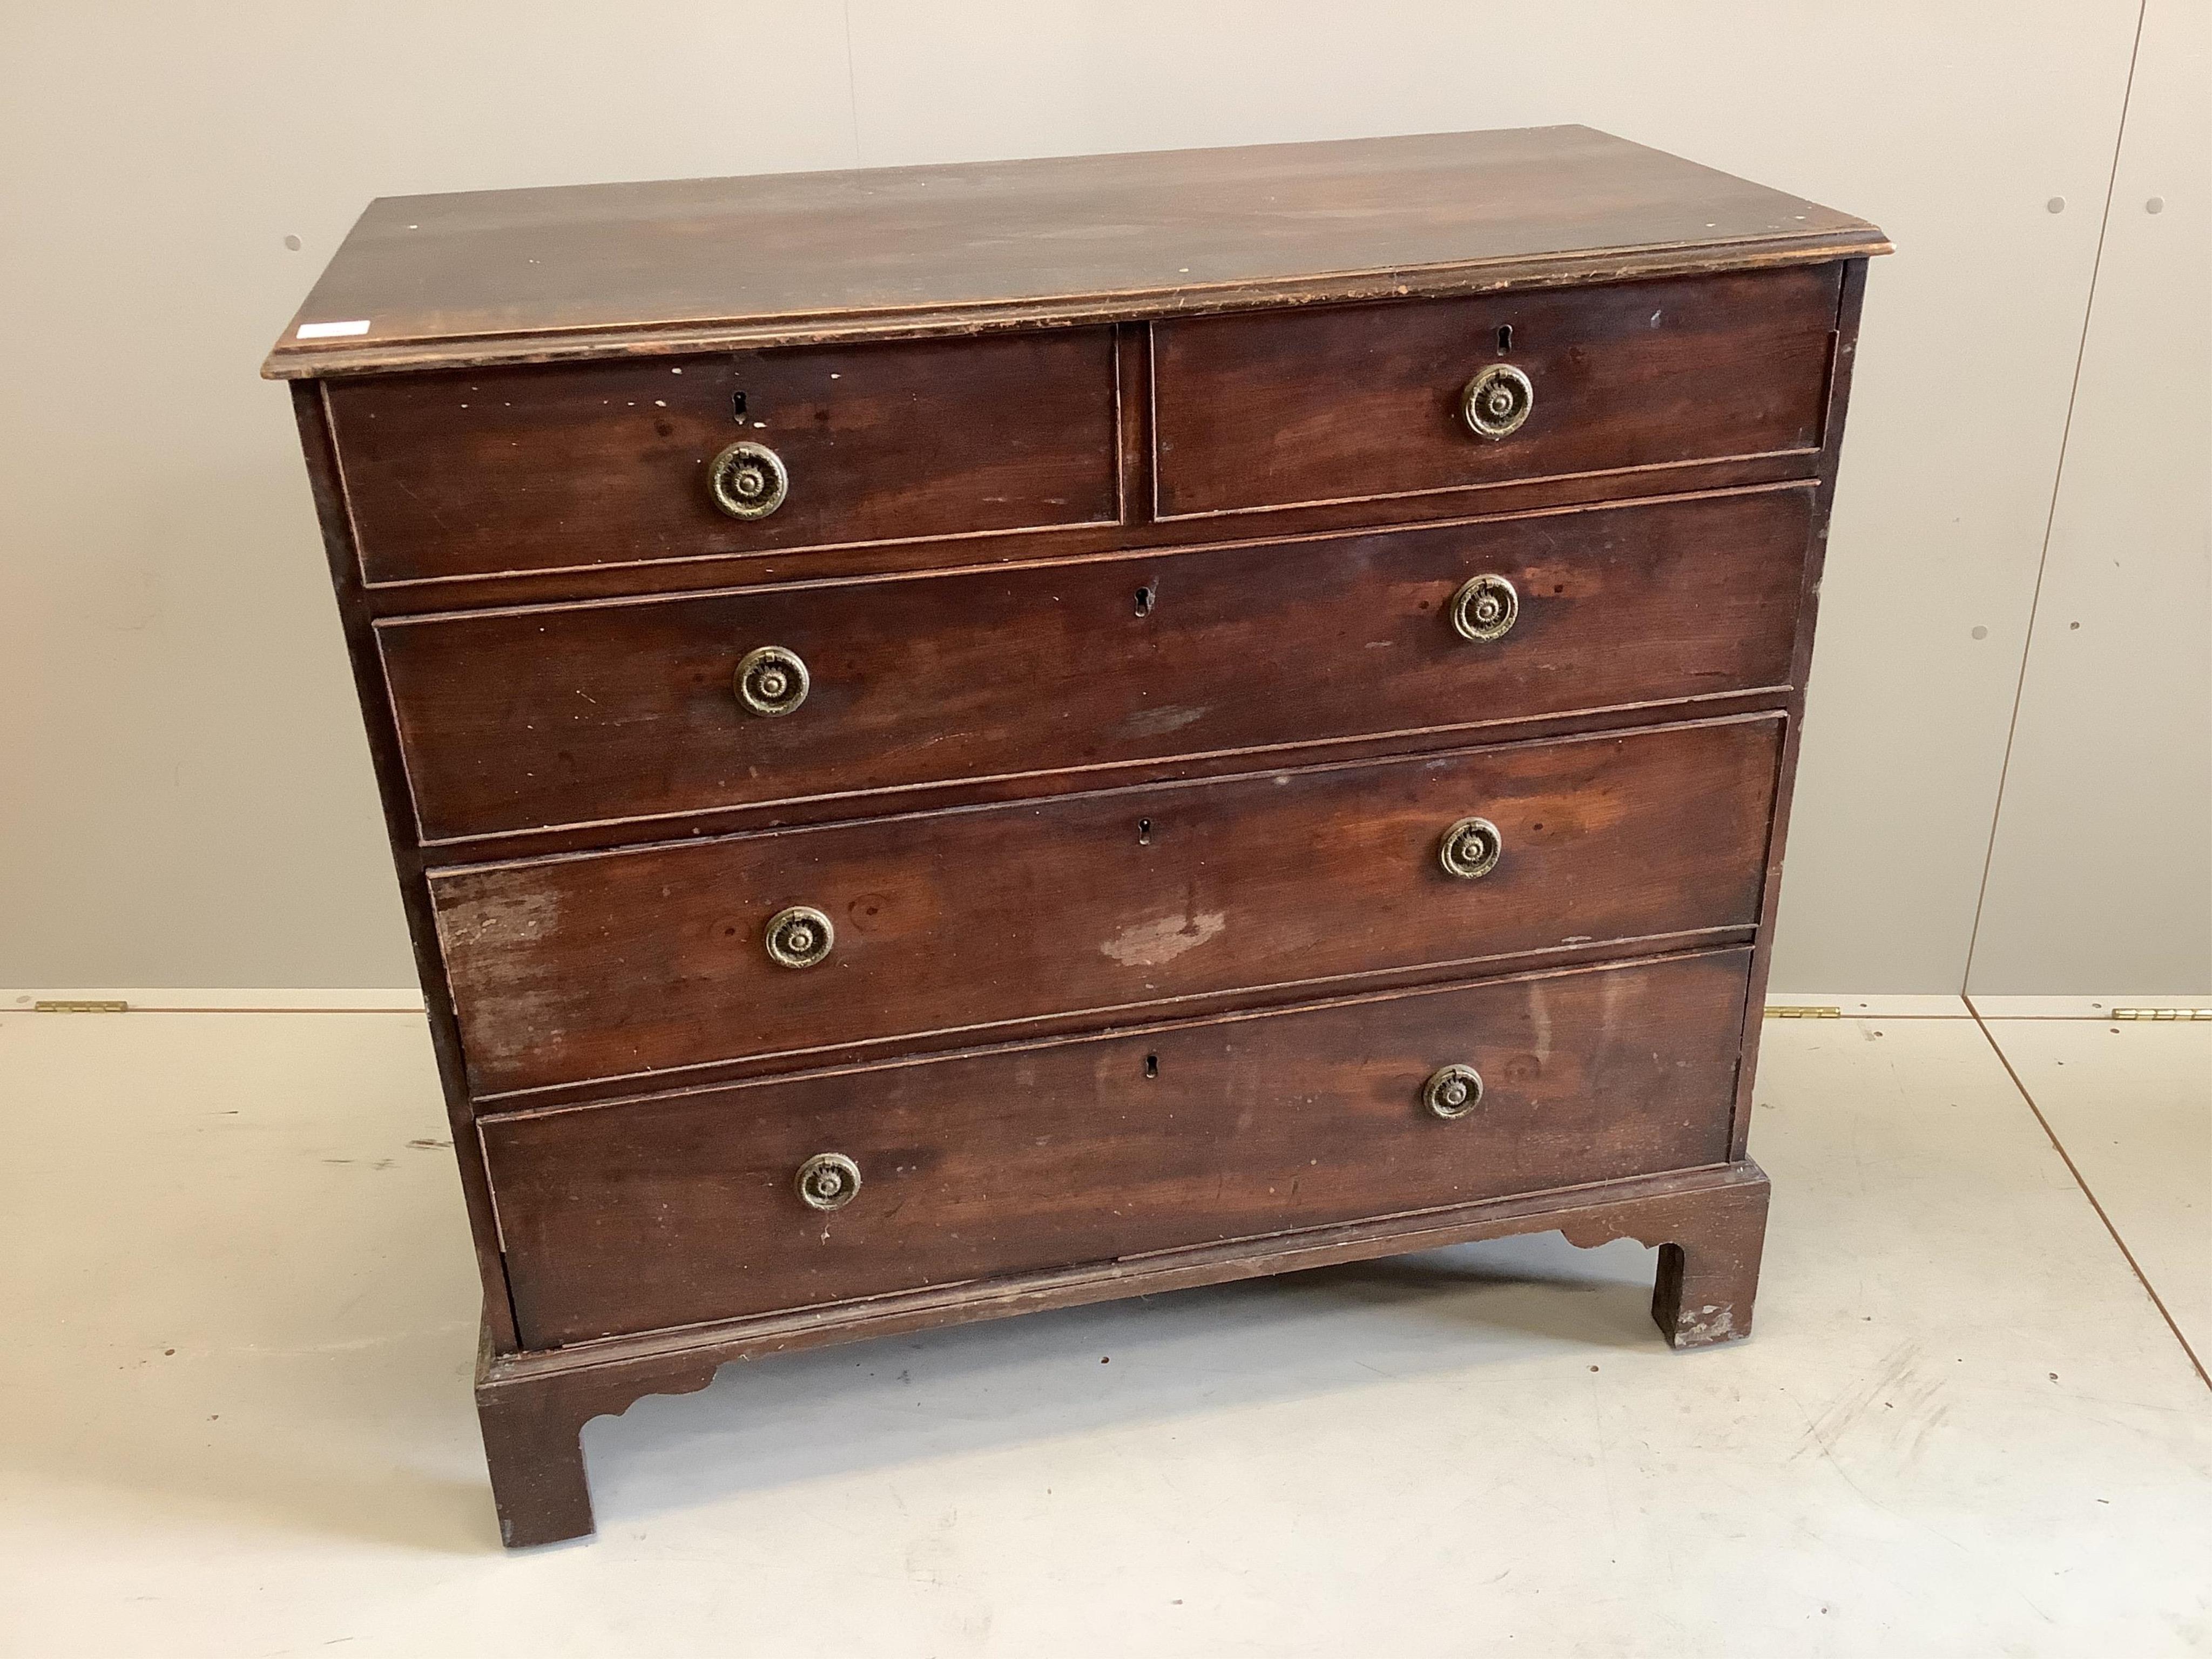 A George III mahogany five drawer chest, width 107cm, depth 51cm, height 98cm. Condition - poor